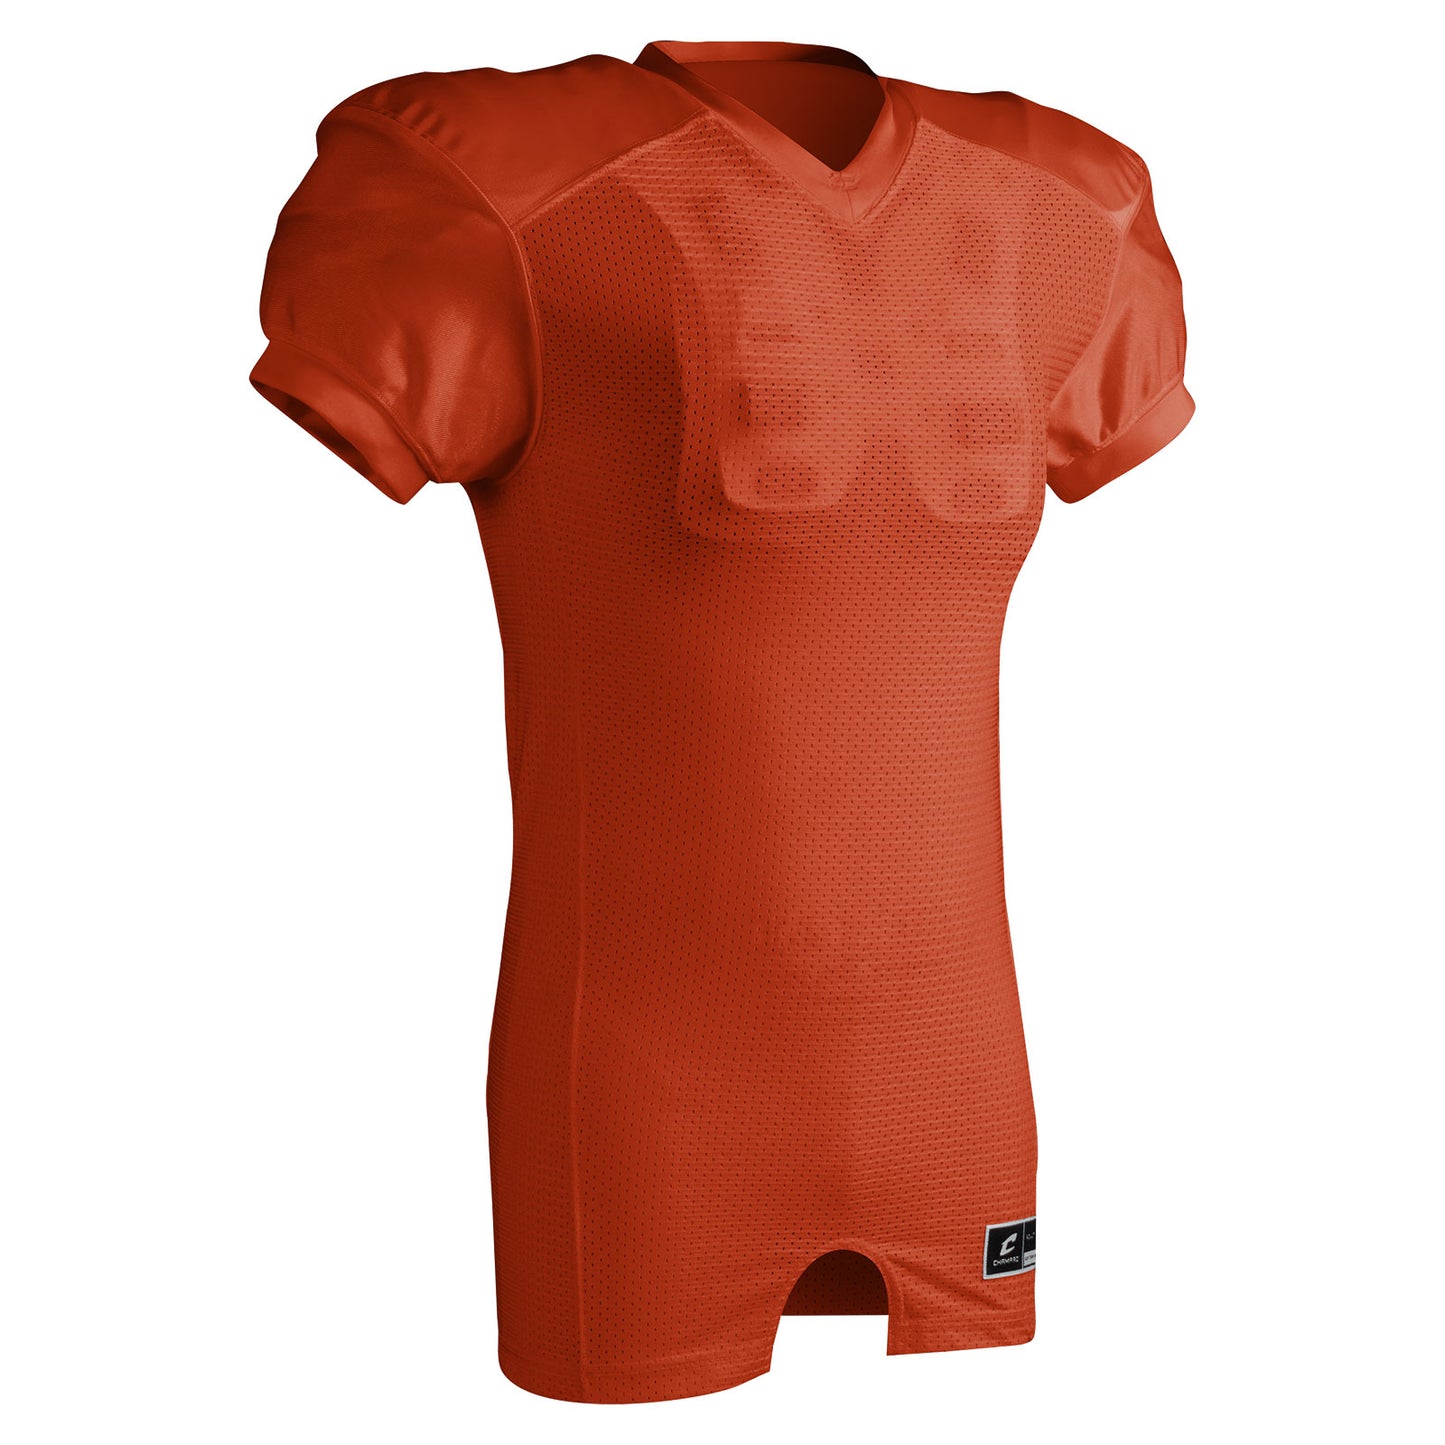 Pro-Fit Collegiate Fit Football Game Jersey ORANGE BODY